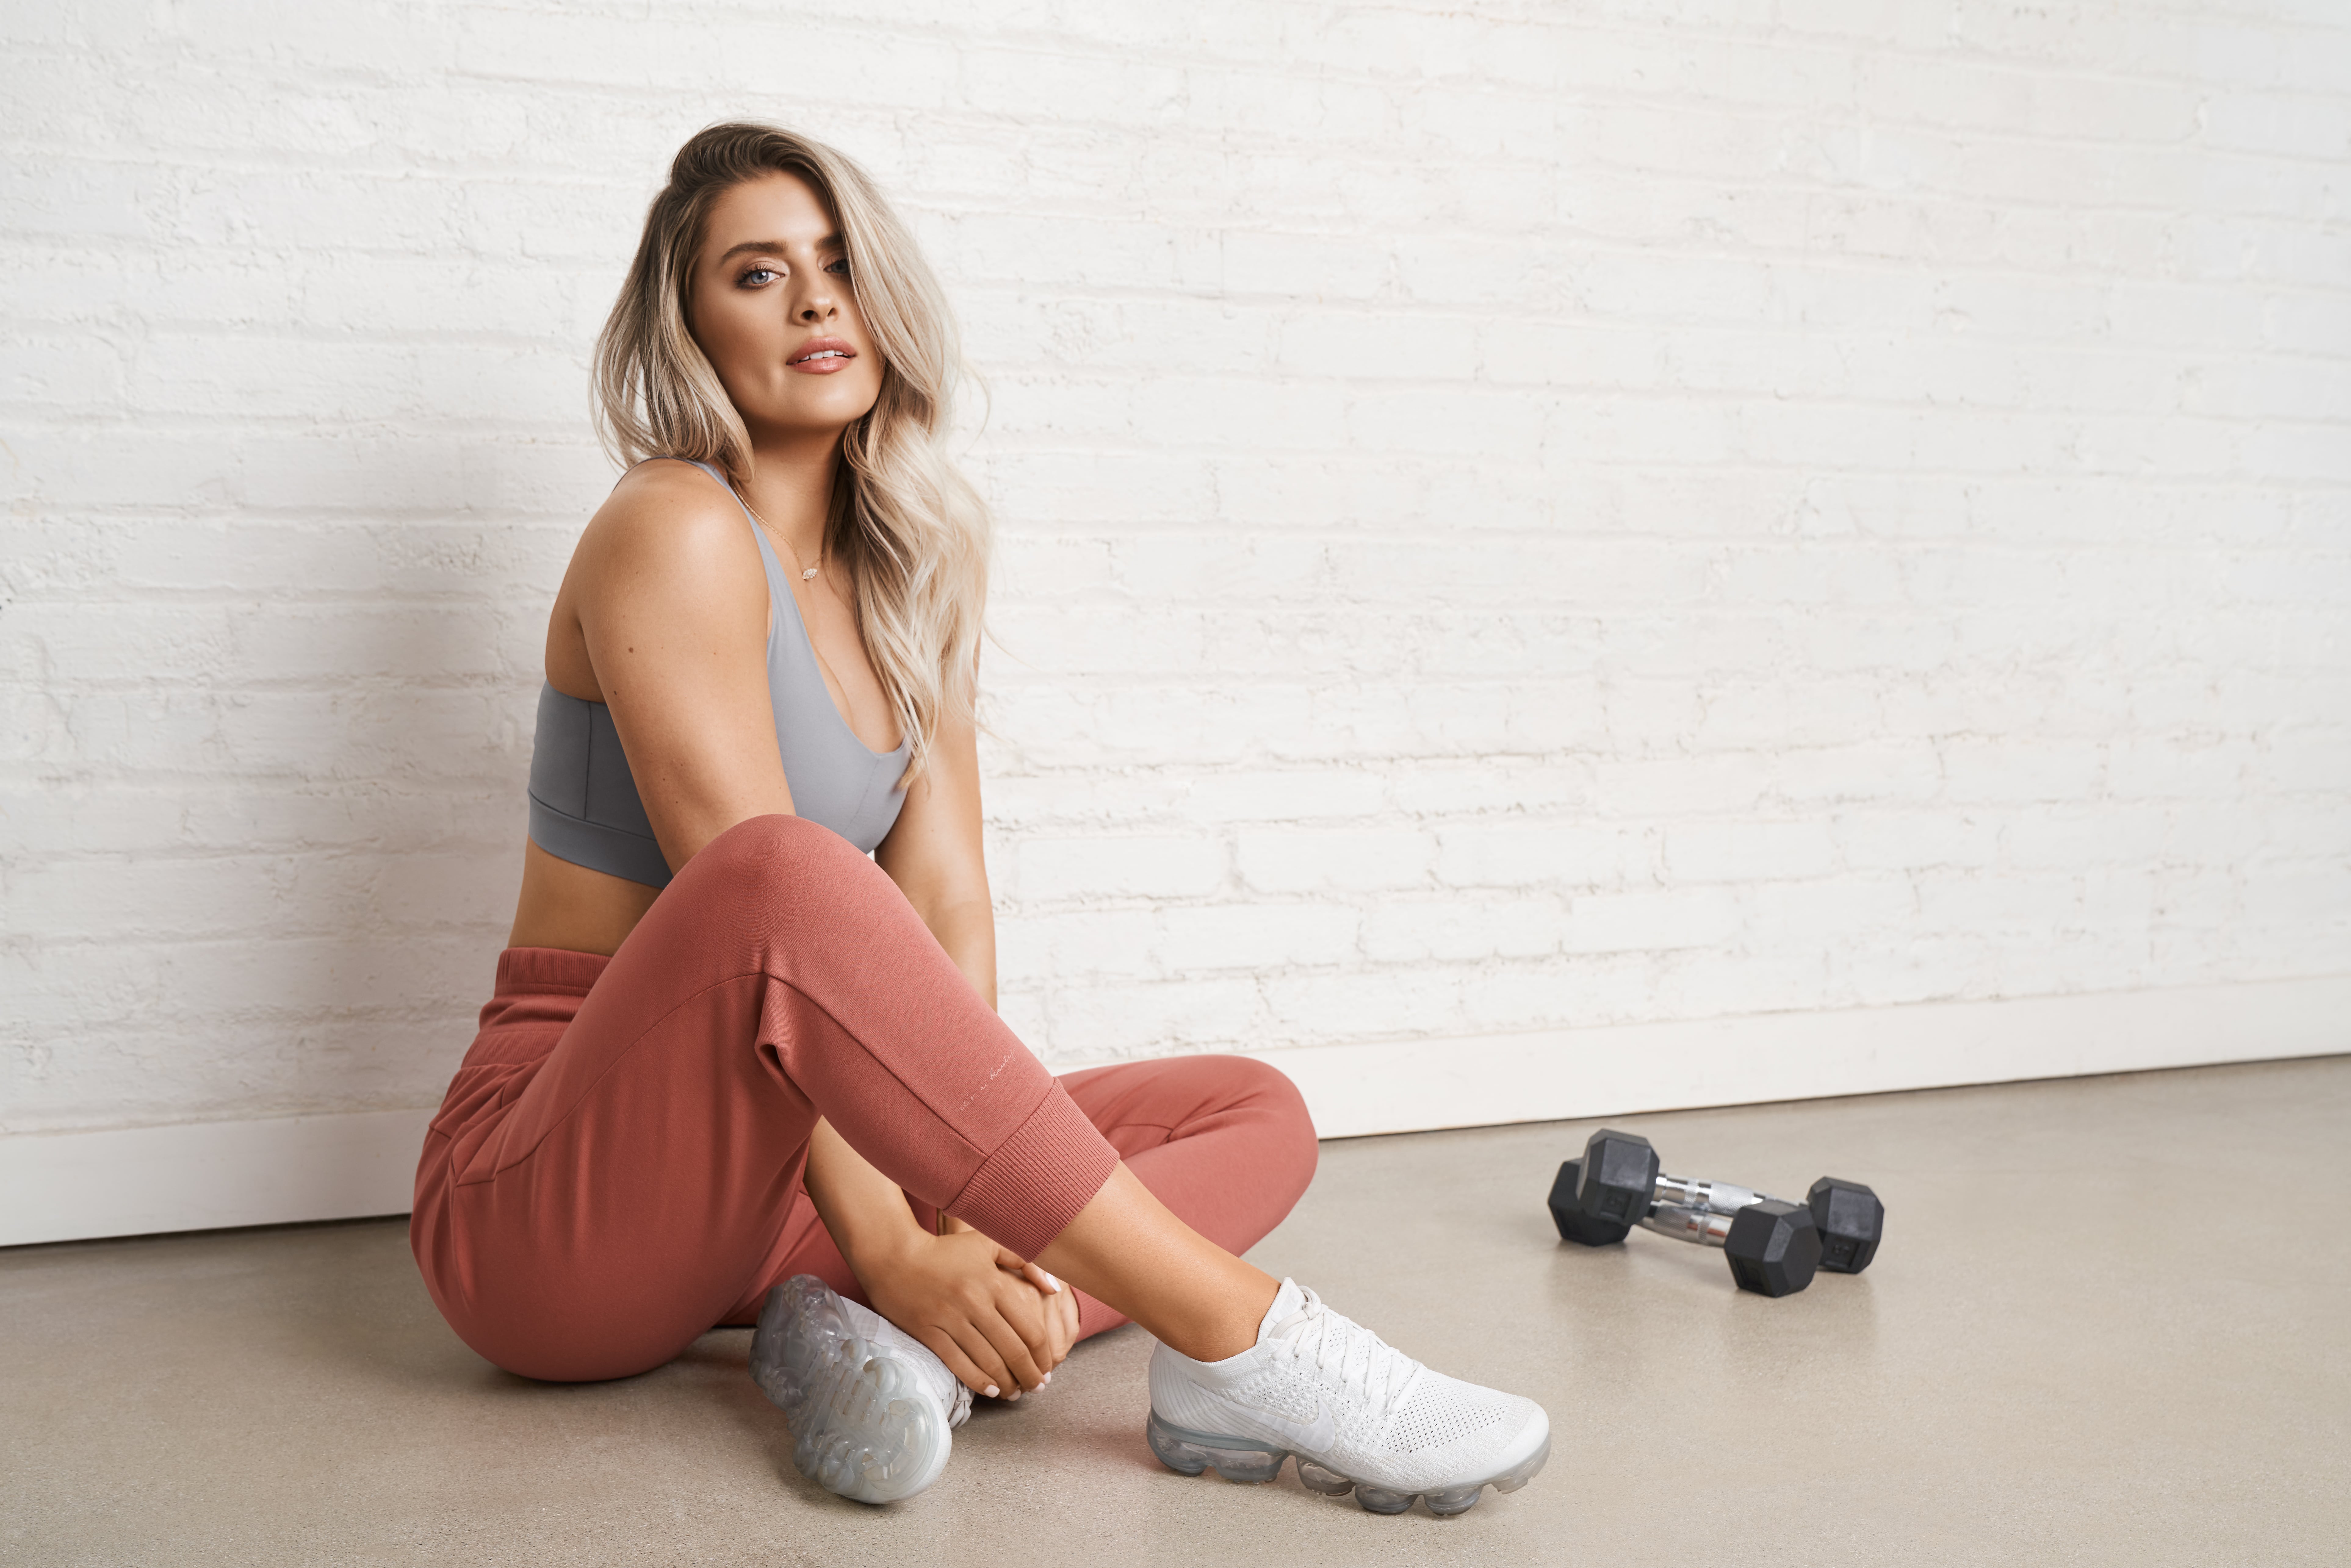 Gymshark x Whitney Simmons Collection - The Final Collection